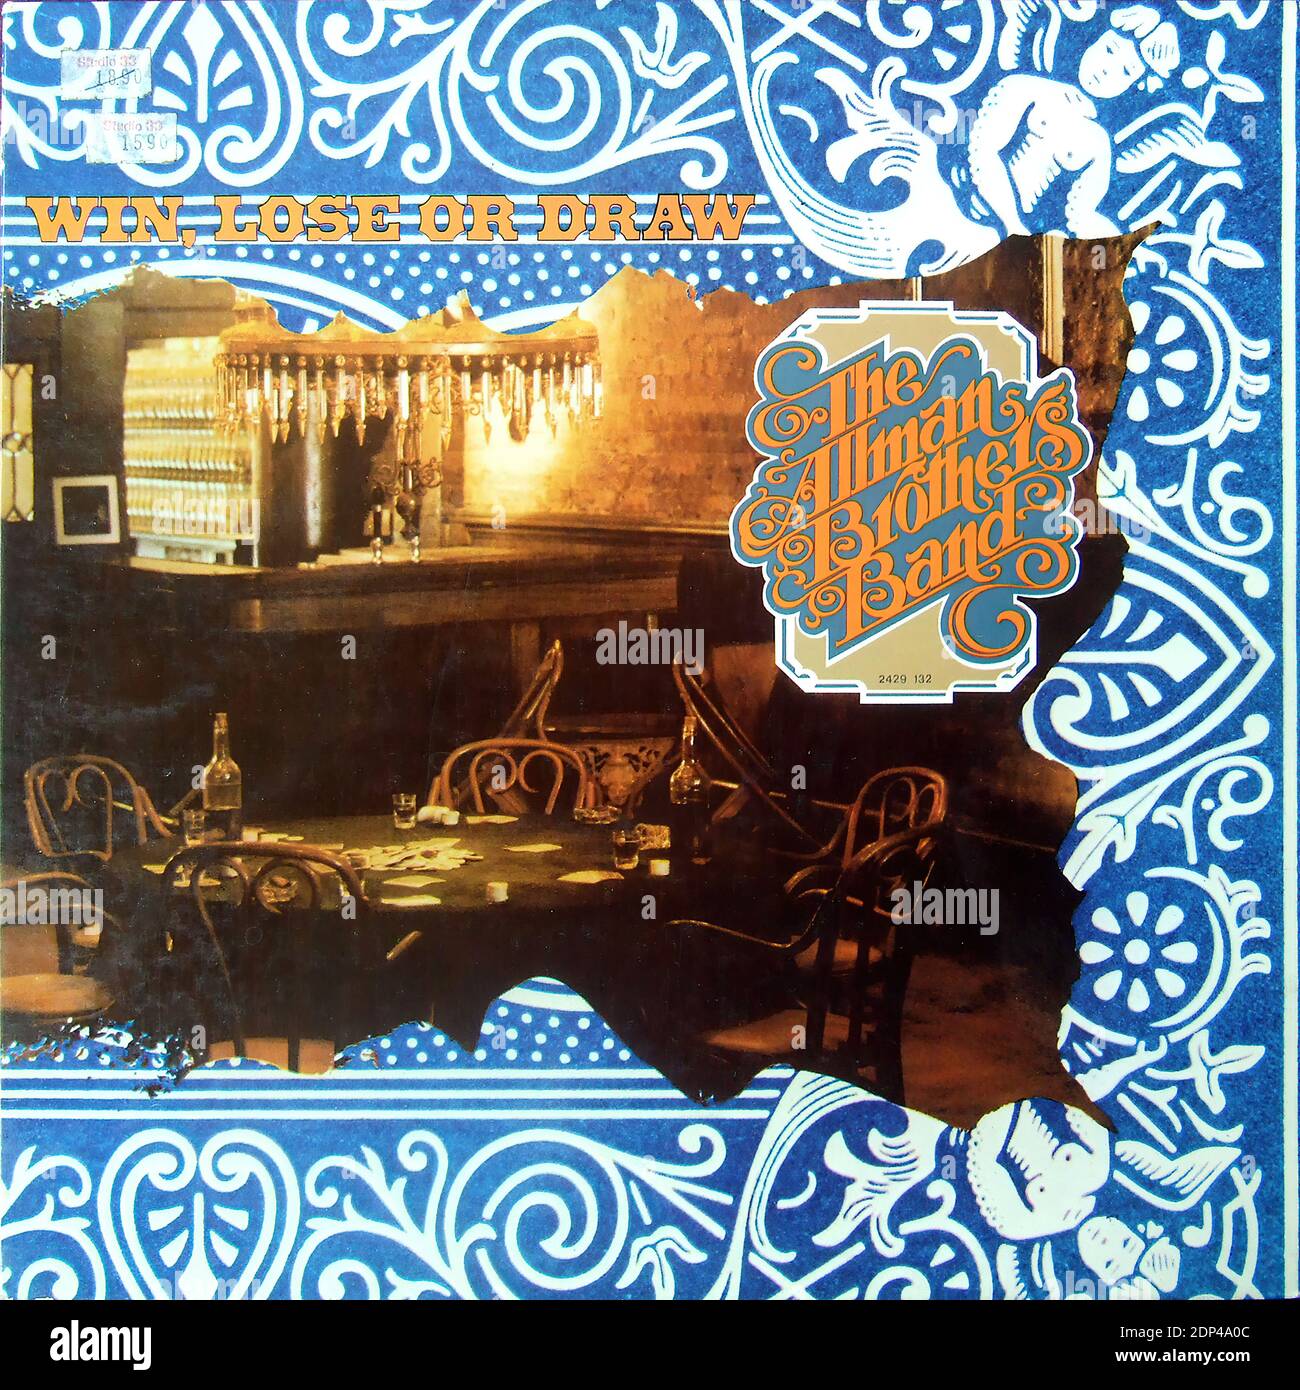 The Allman Brothers Band - Win, Lose Or Draw - Vintage vinyl album cover Stock Photo